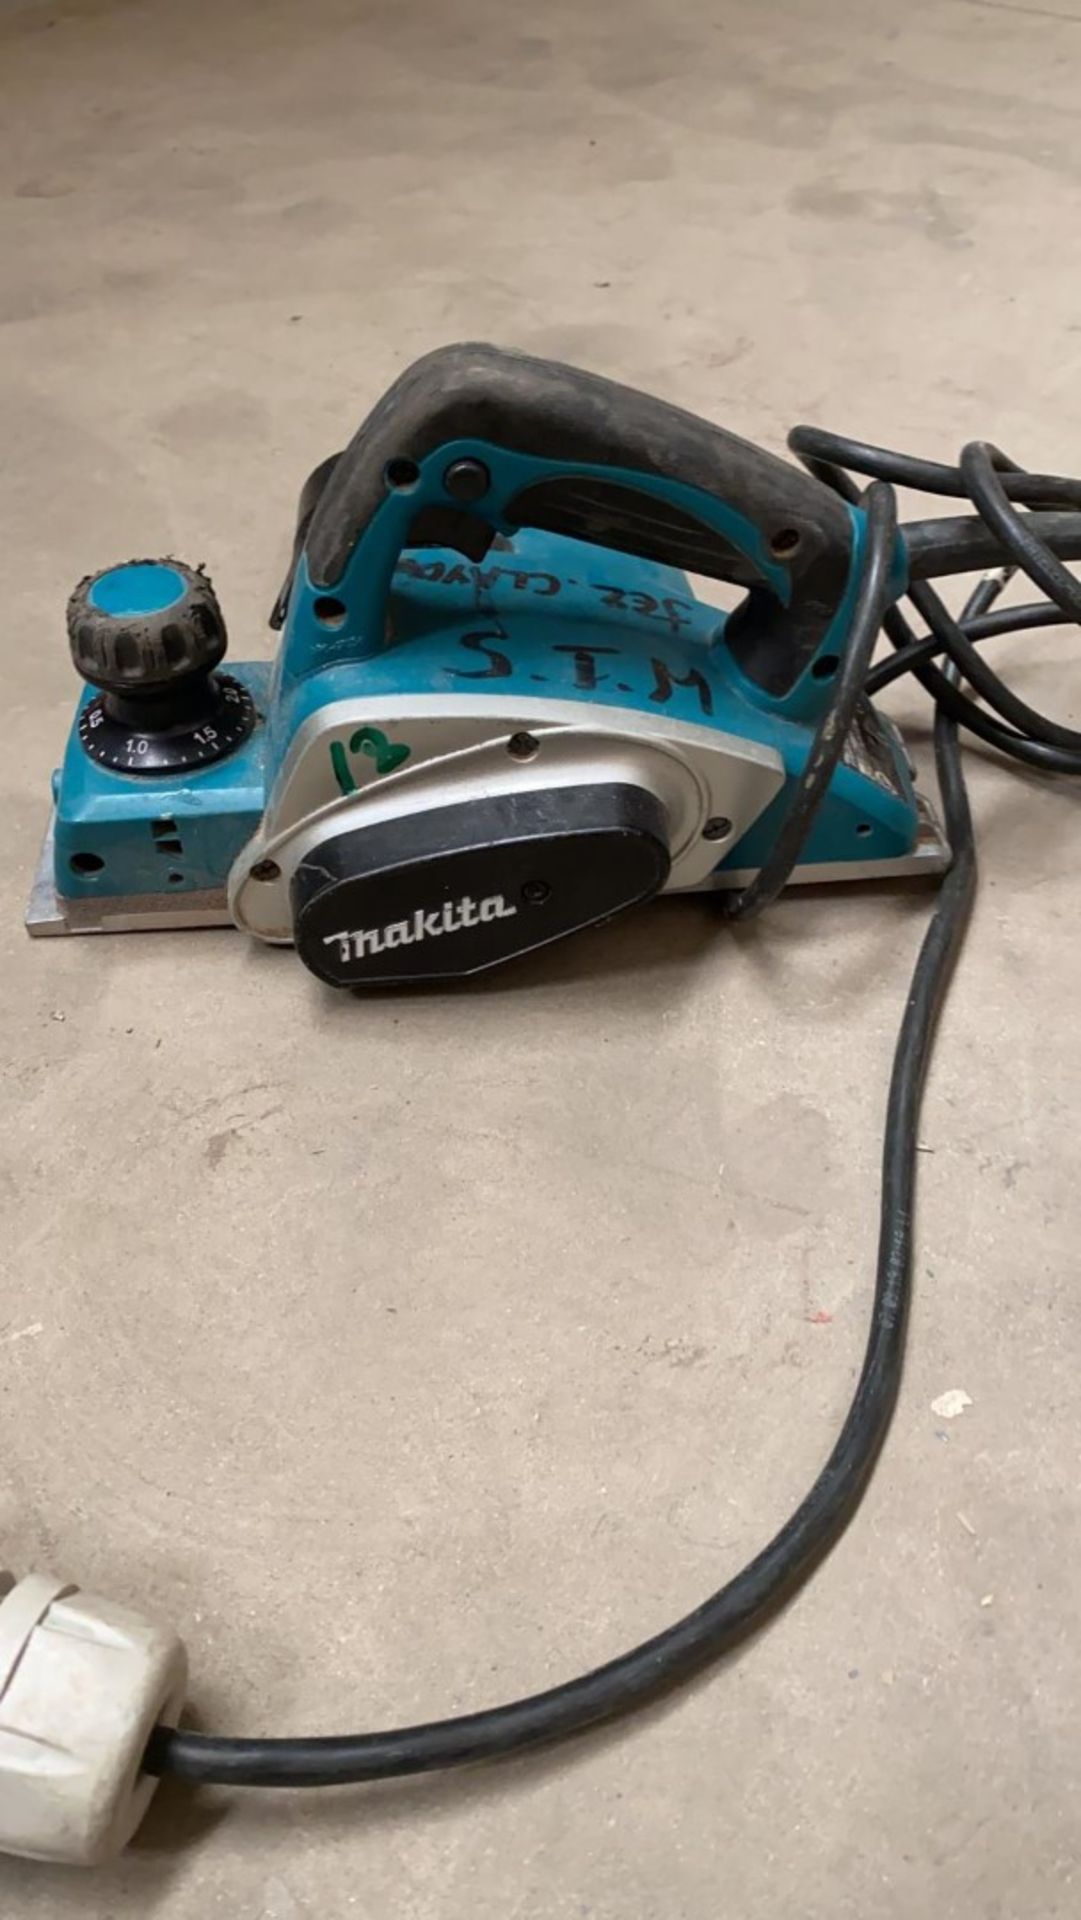 1 x Makita 110V Planer - Used, Recently Removed From A Working Site - CL505 - Ref: TL041 - Location: - Image 4 of 4